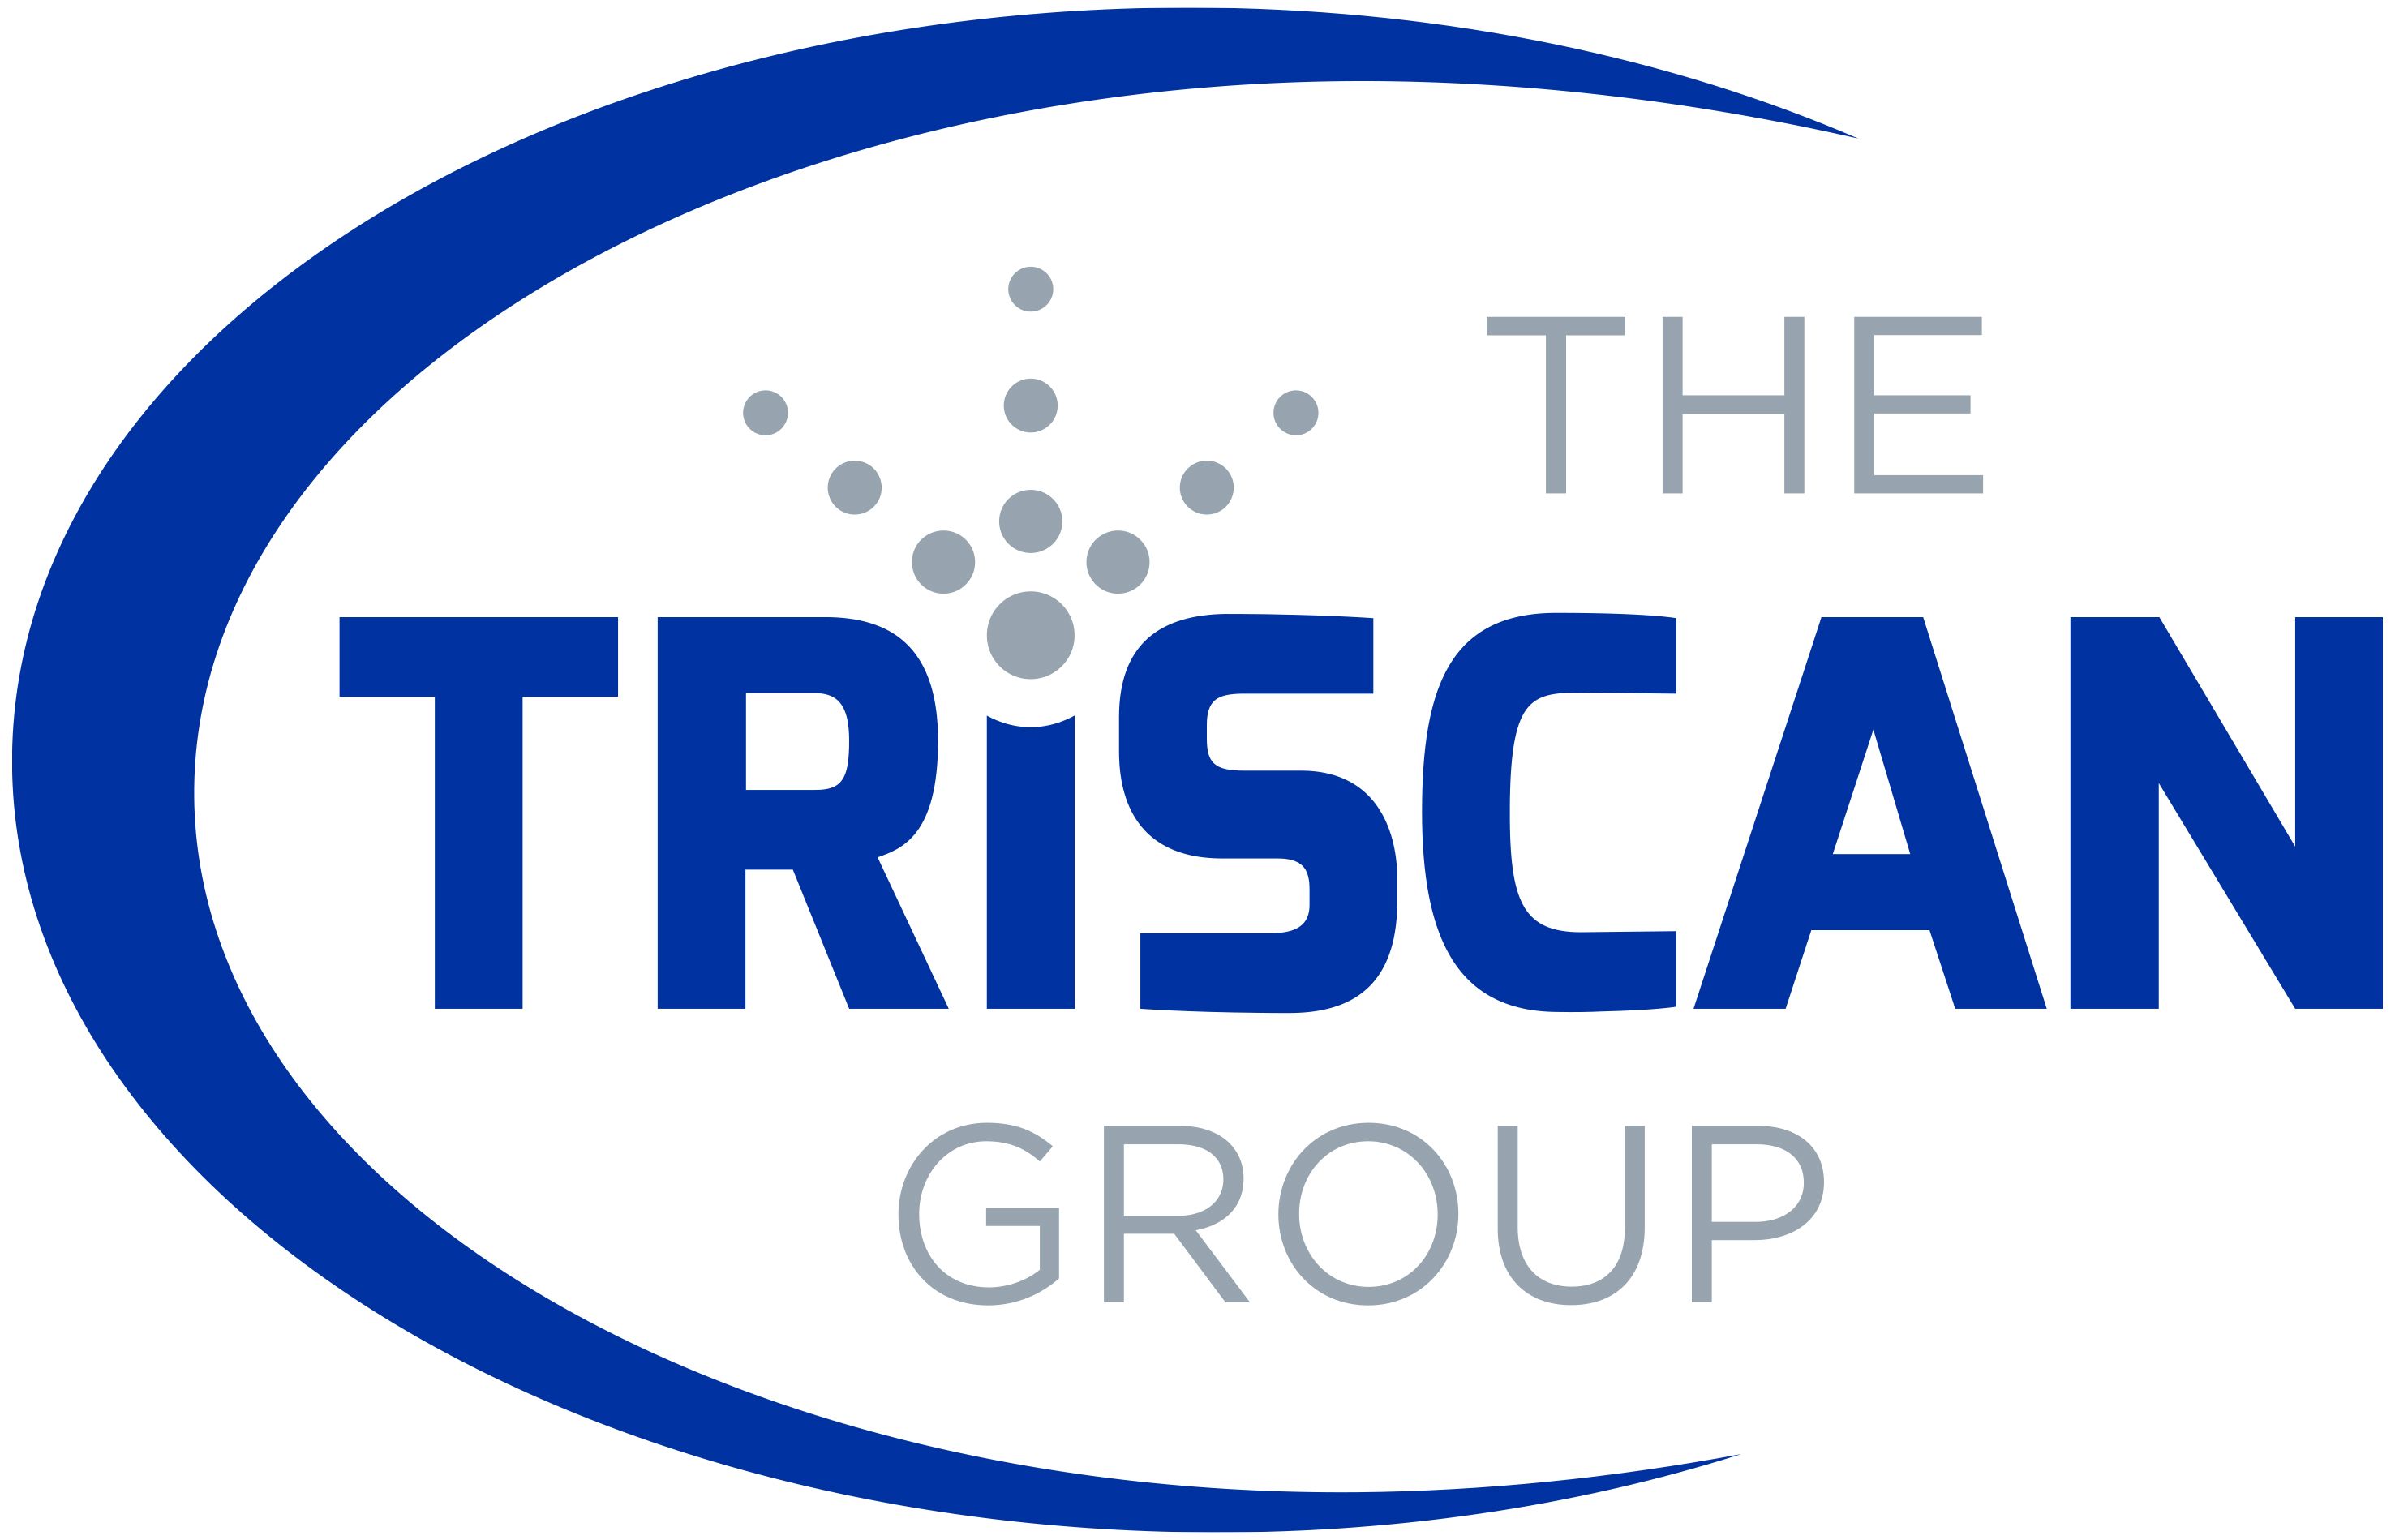 The Triscan Group